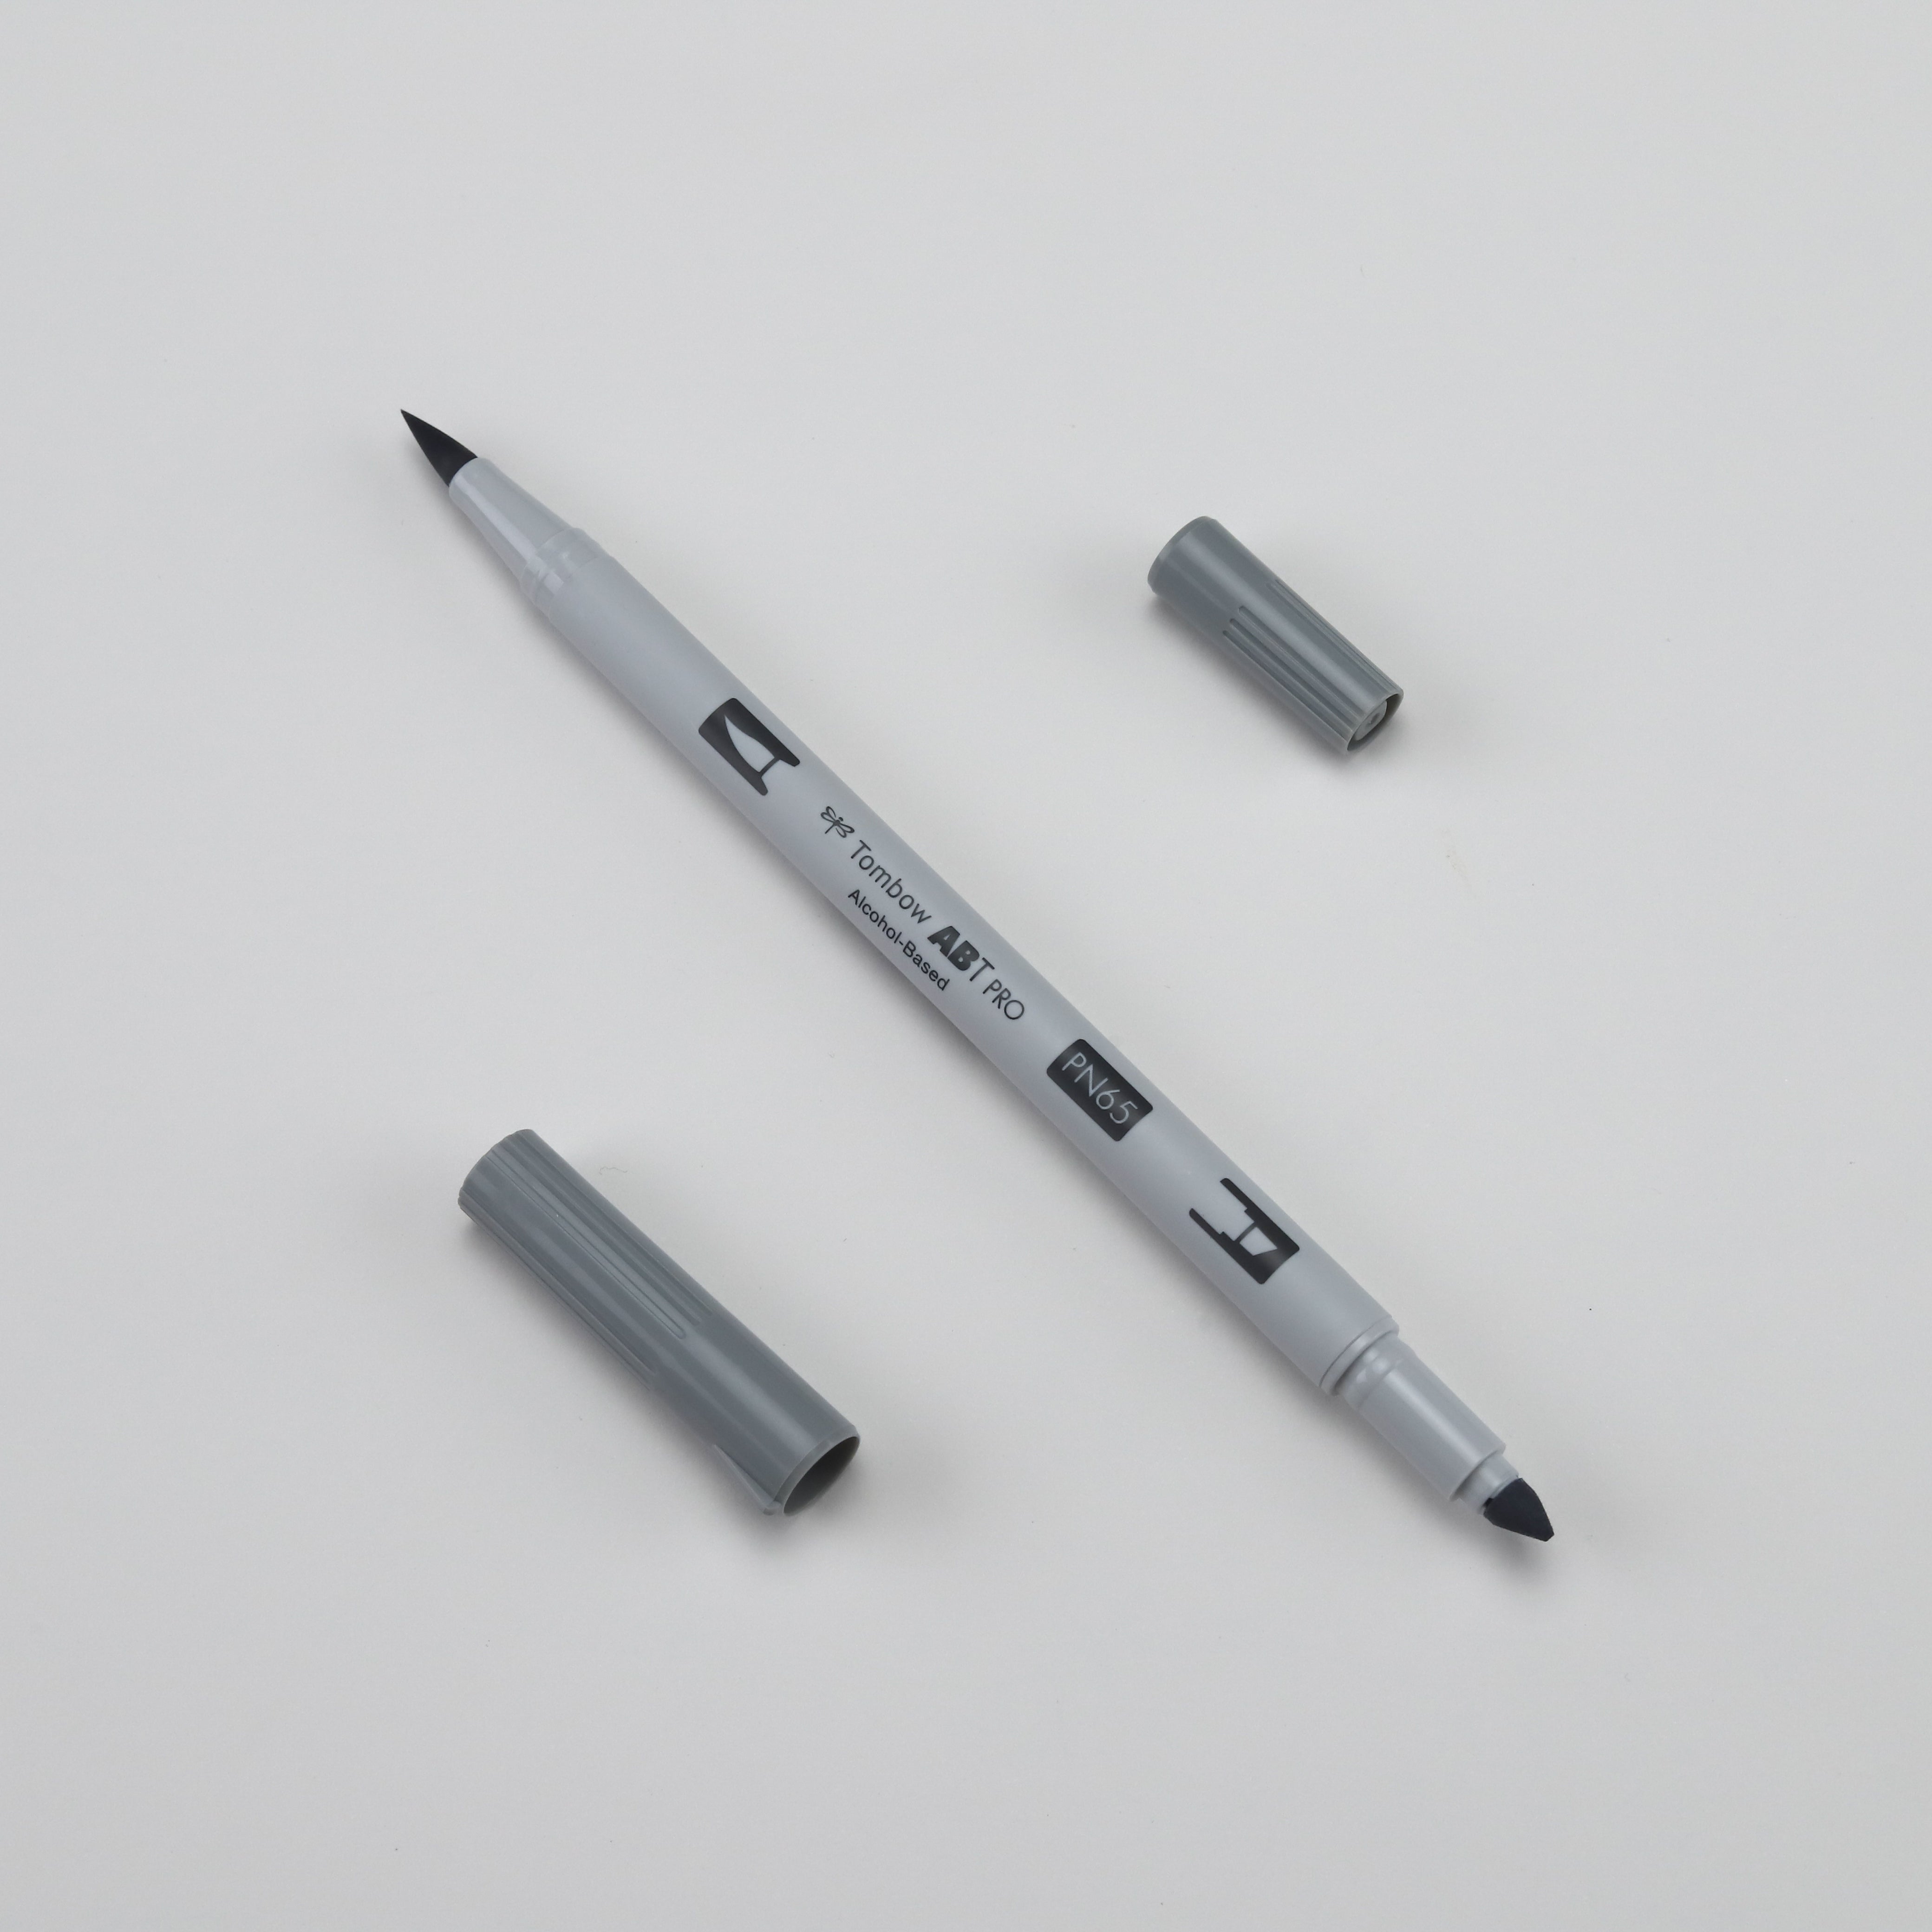 Tombow ABT PRO Alcohol-Based Art Marker - Cool Gray 5 - PN65